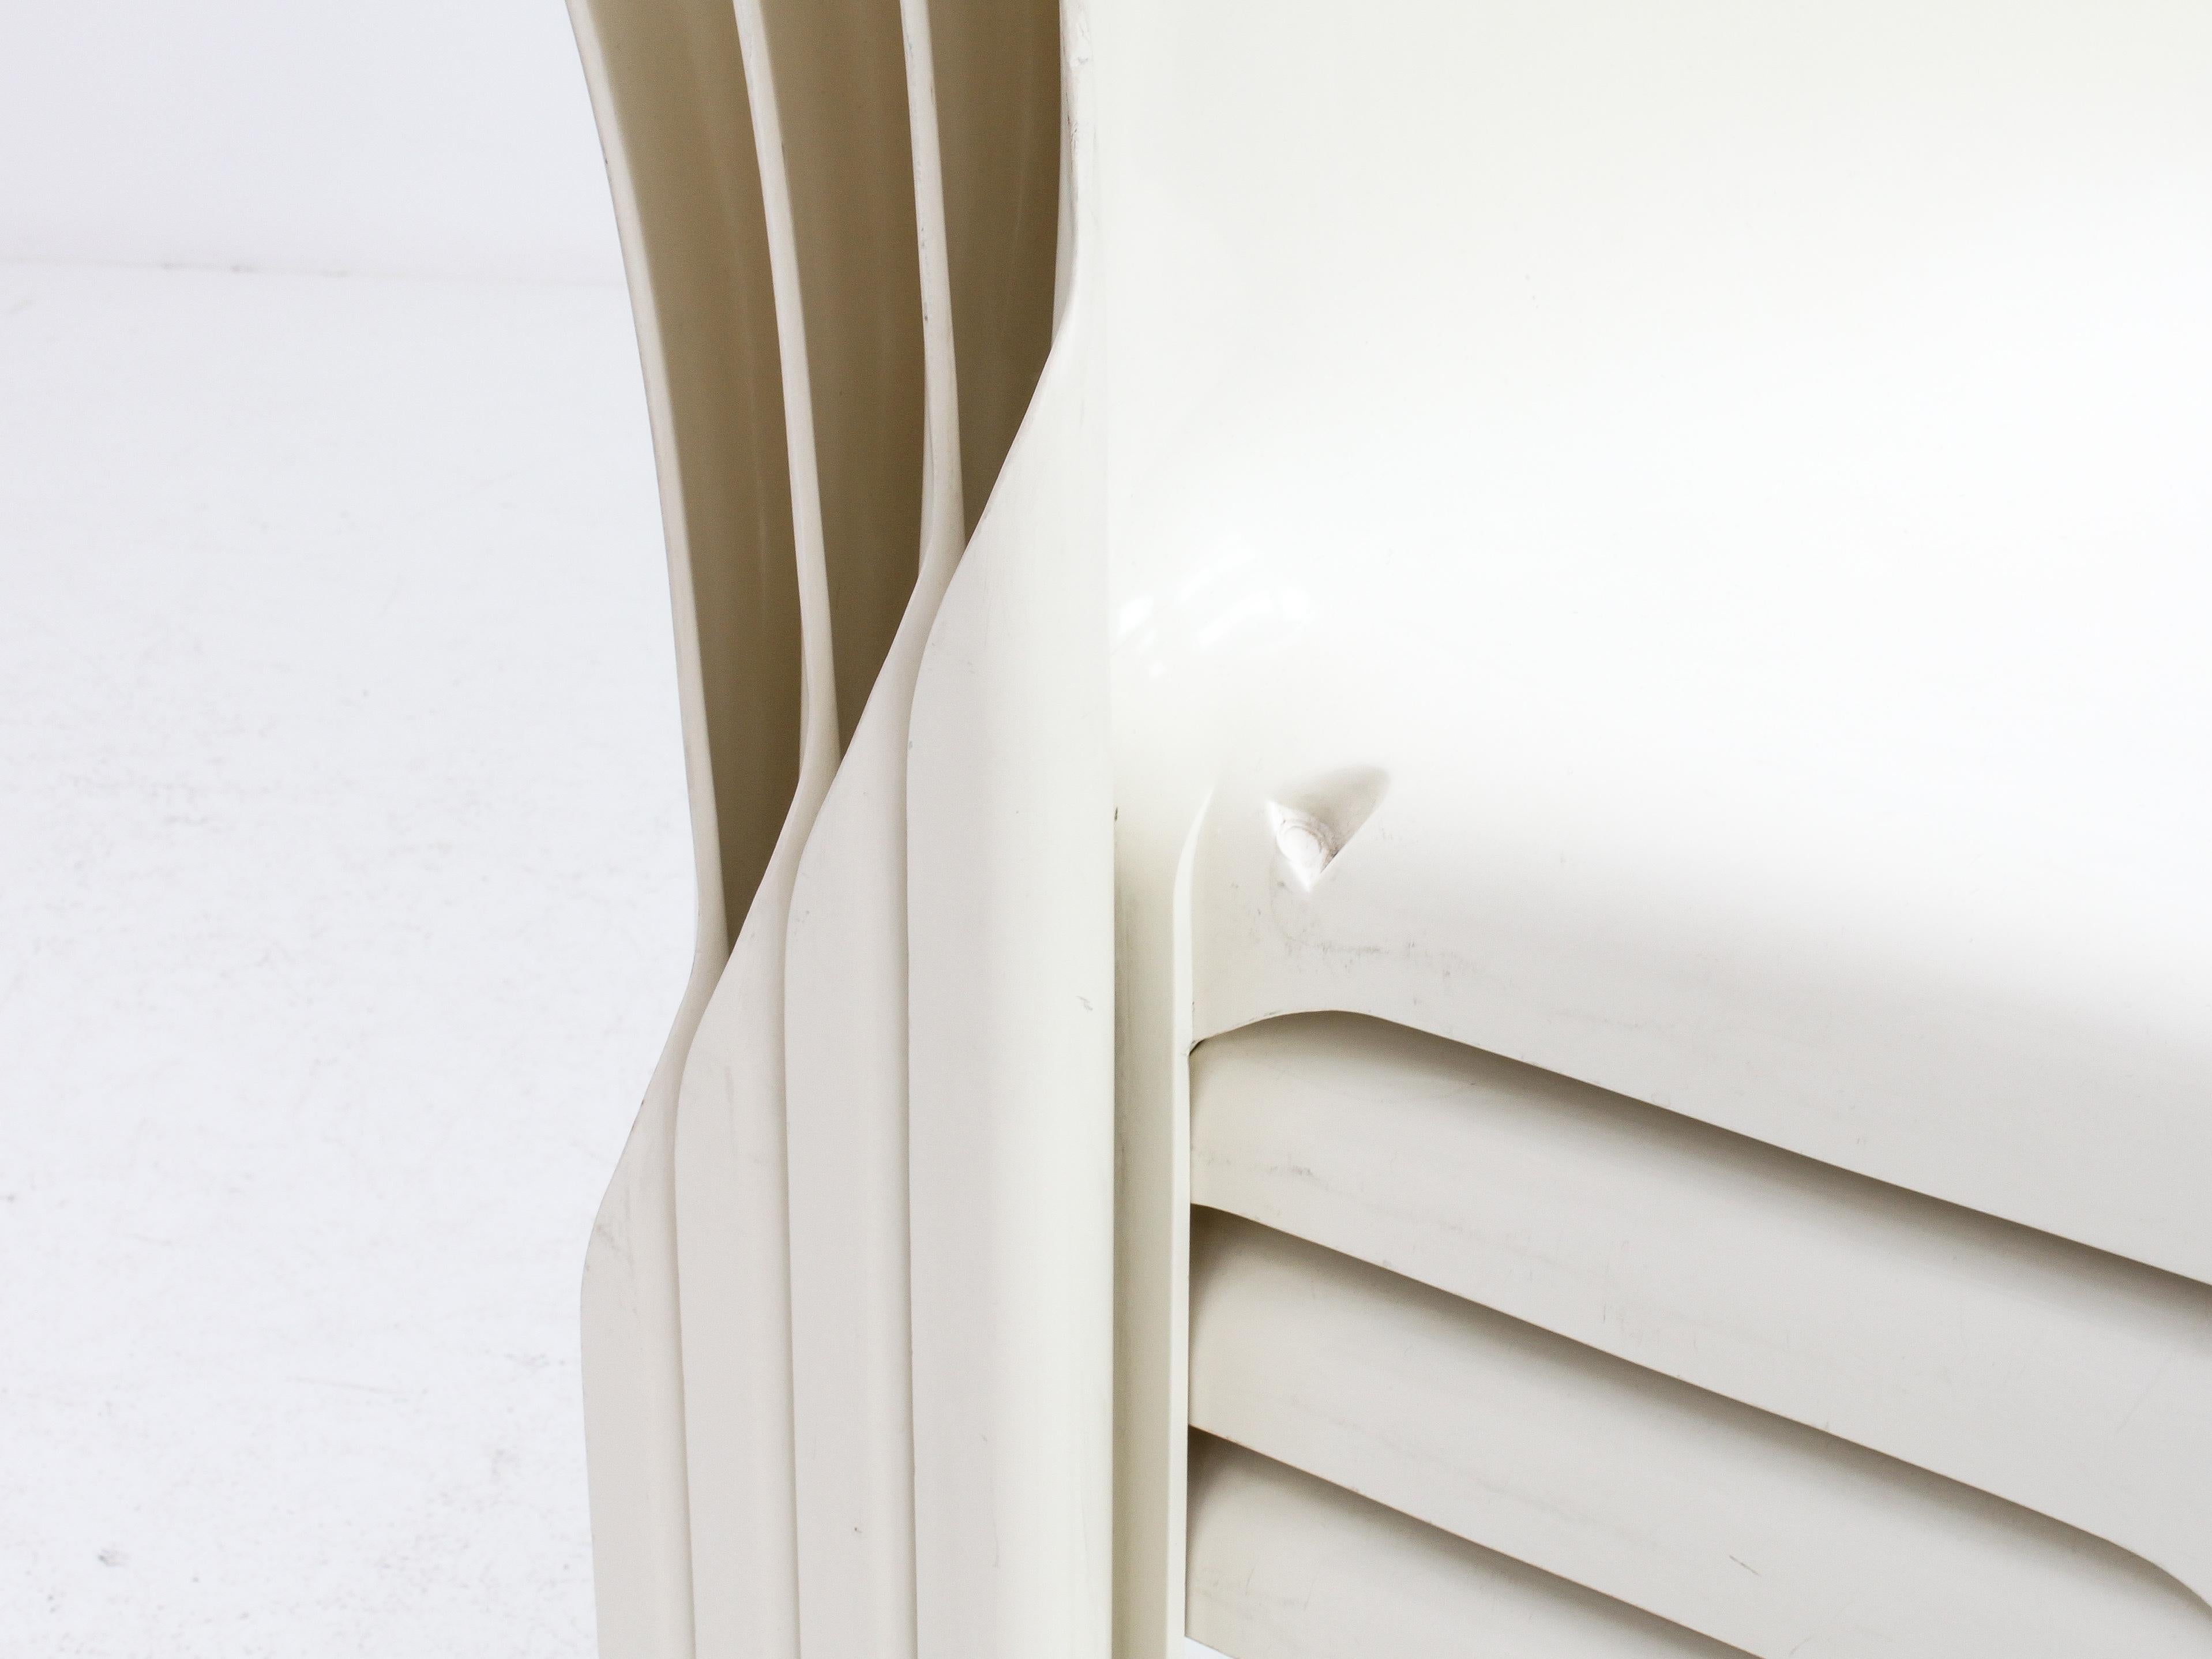 Mid-Century Modern 'Selene' Stacking Chairs in White by Vico Magistretti for Artemide, 1969